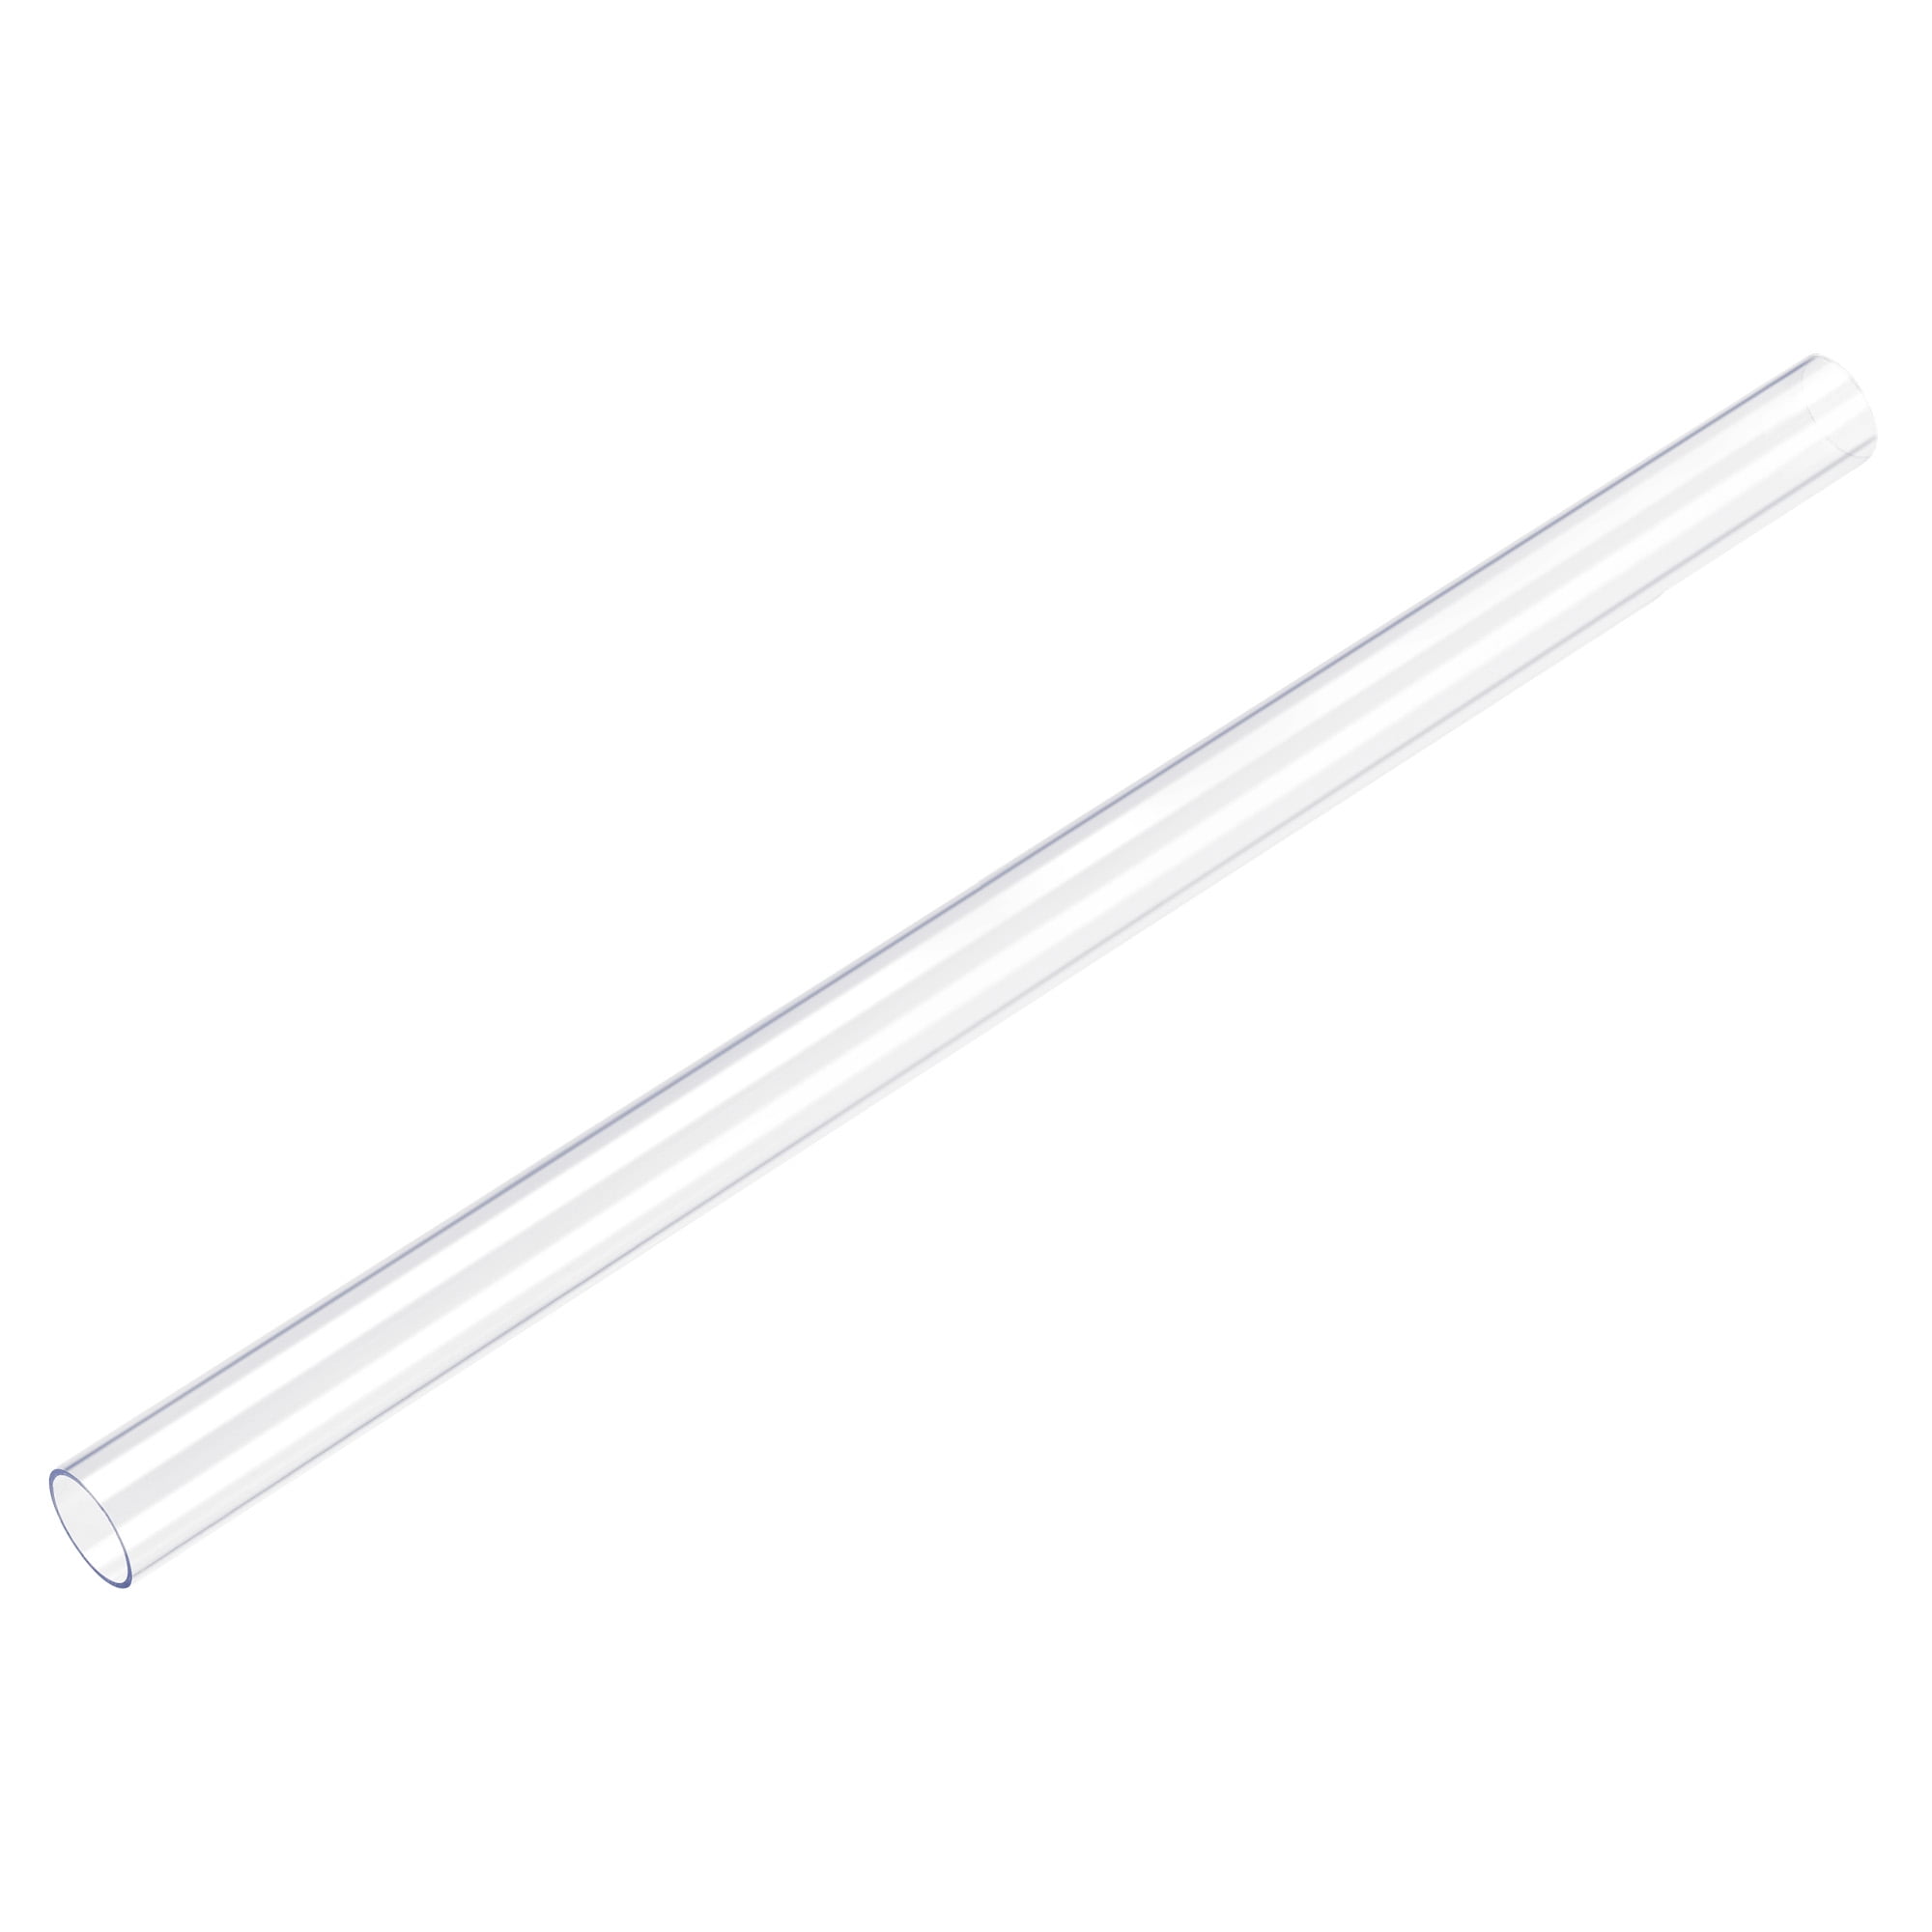 uxcell Rigid Round Clear Tubing 37.6mm(1.48'') ID x 40mm(1.57'') OD x  1.64Ft Length Plastic Tube